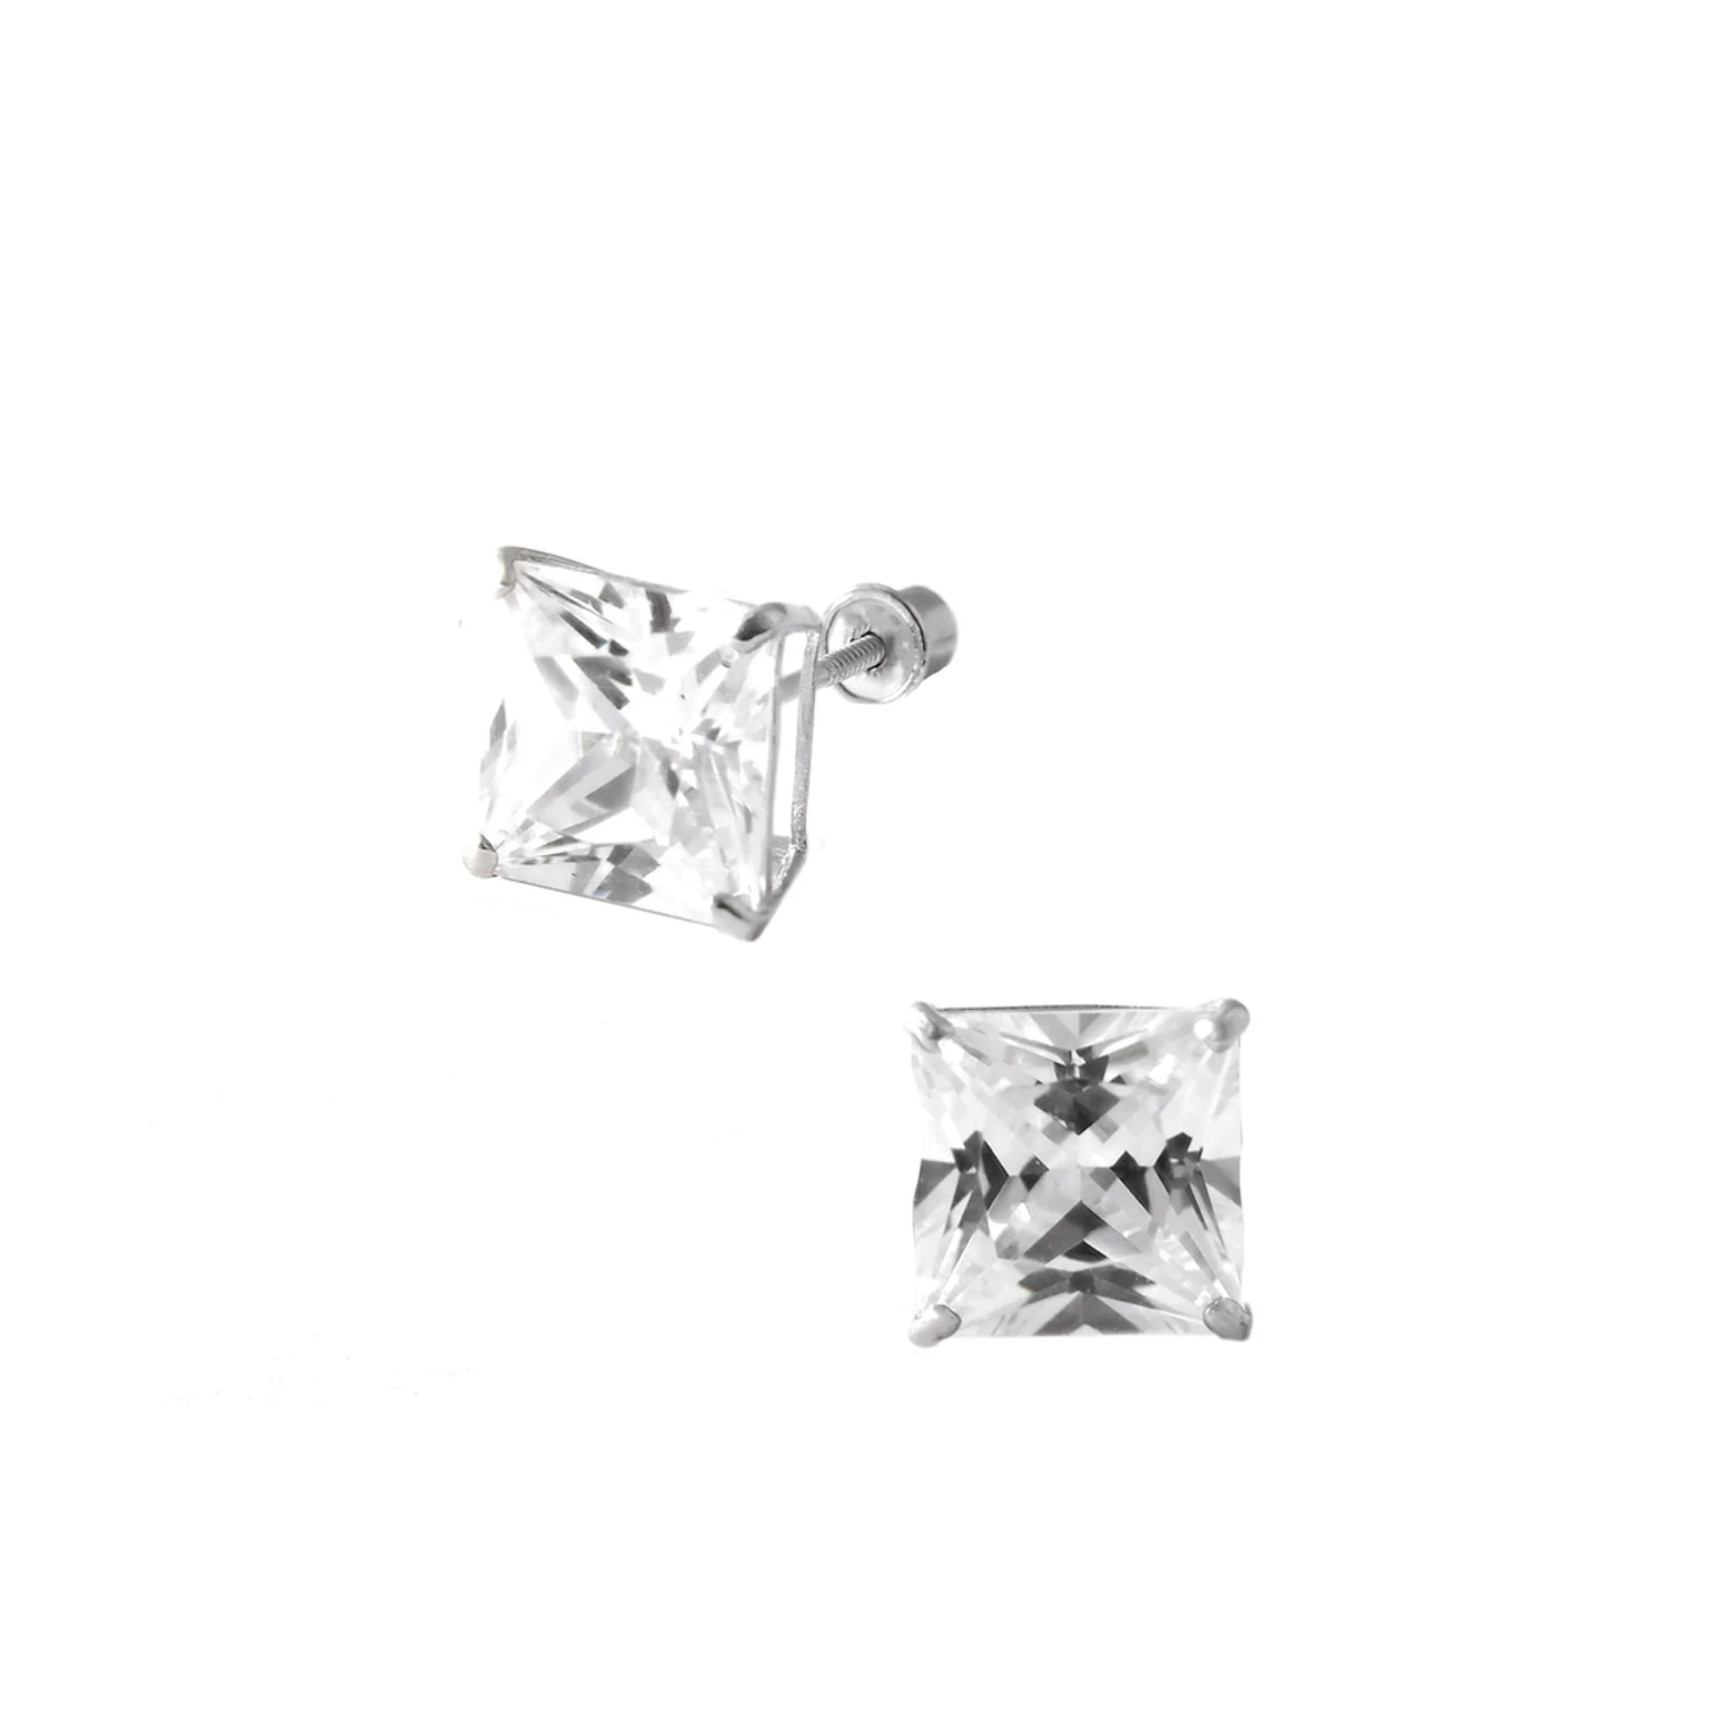 8MM Square CZ White Gold Stud Earrings